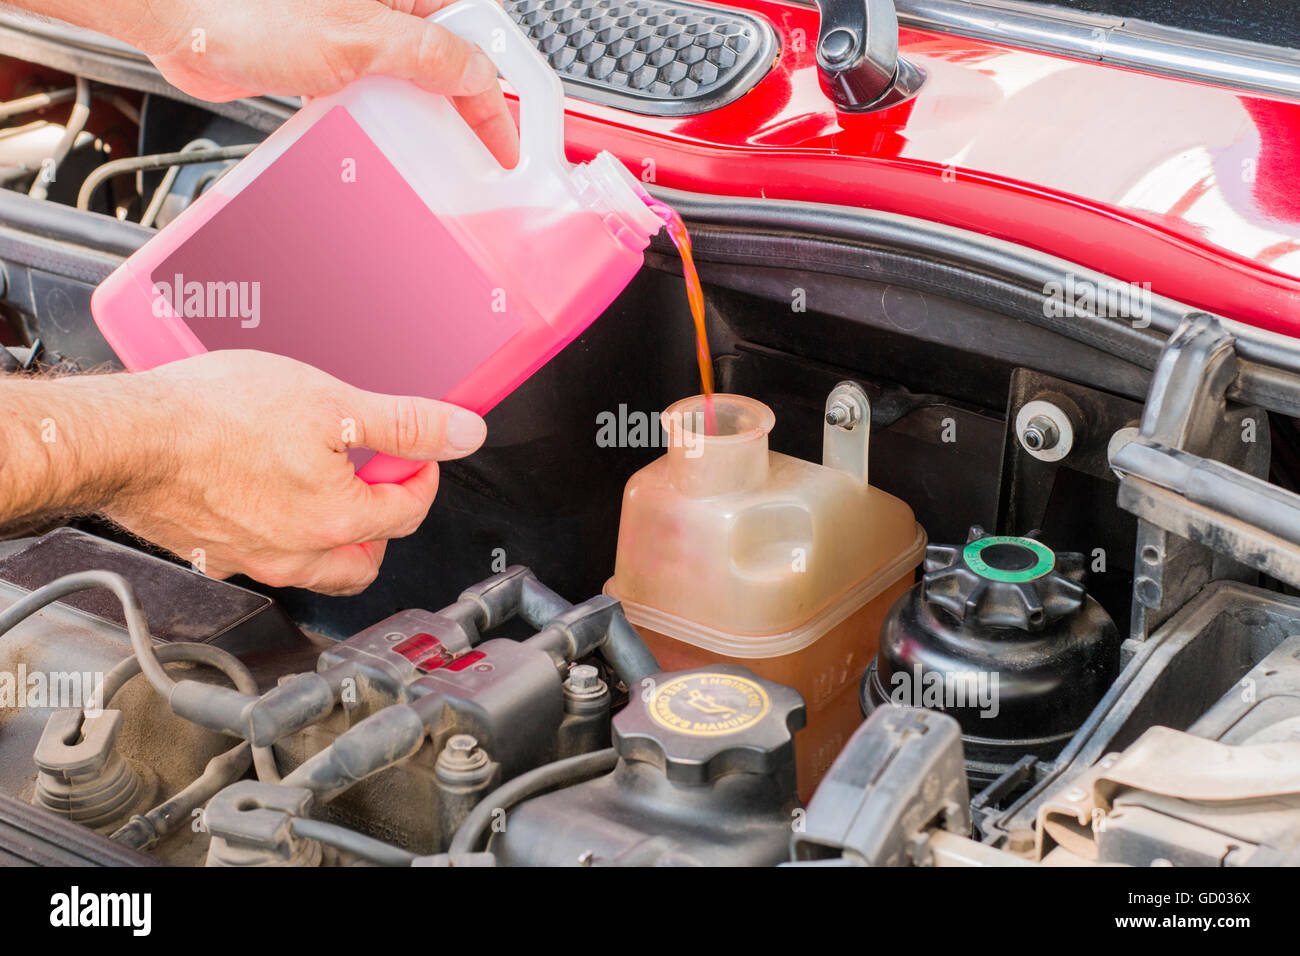 car coolant service in engine Stock Photo